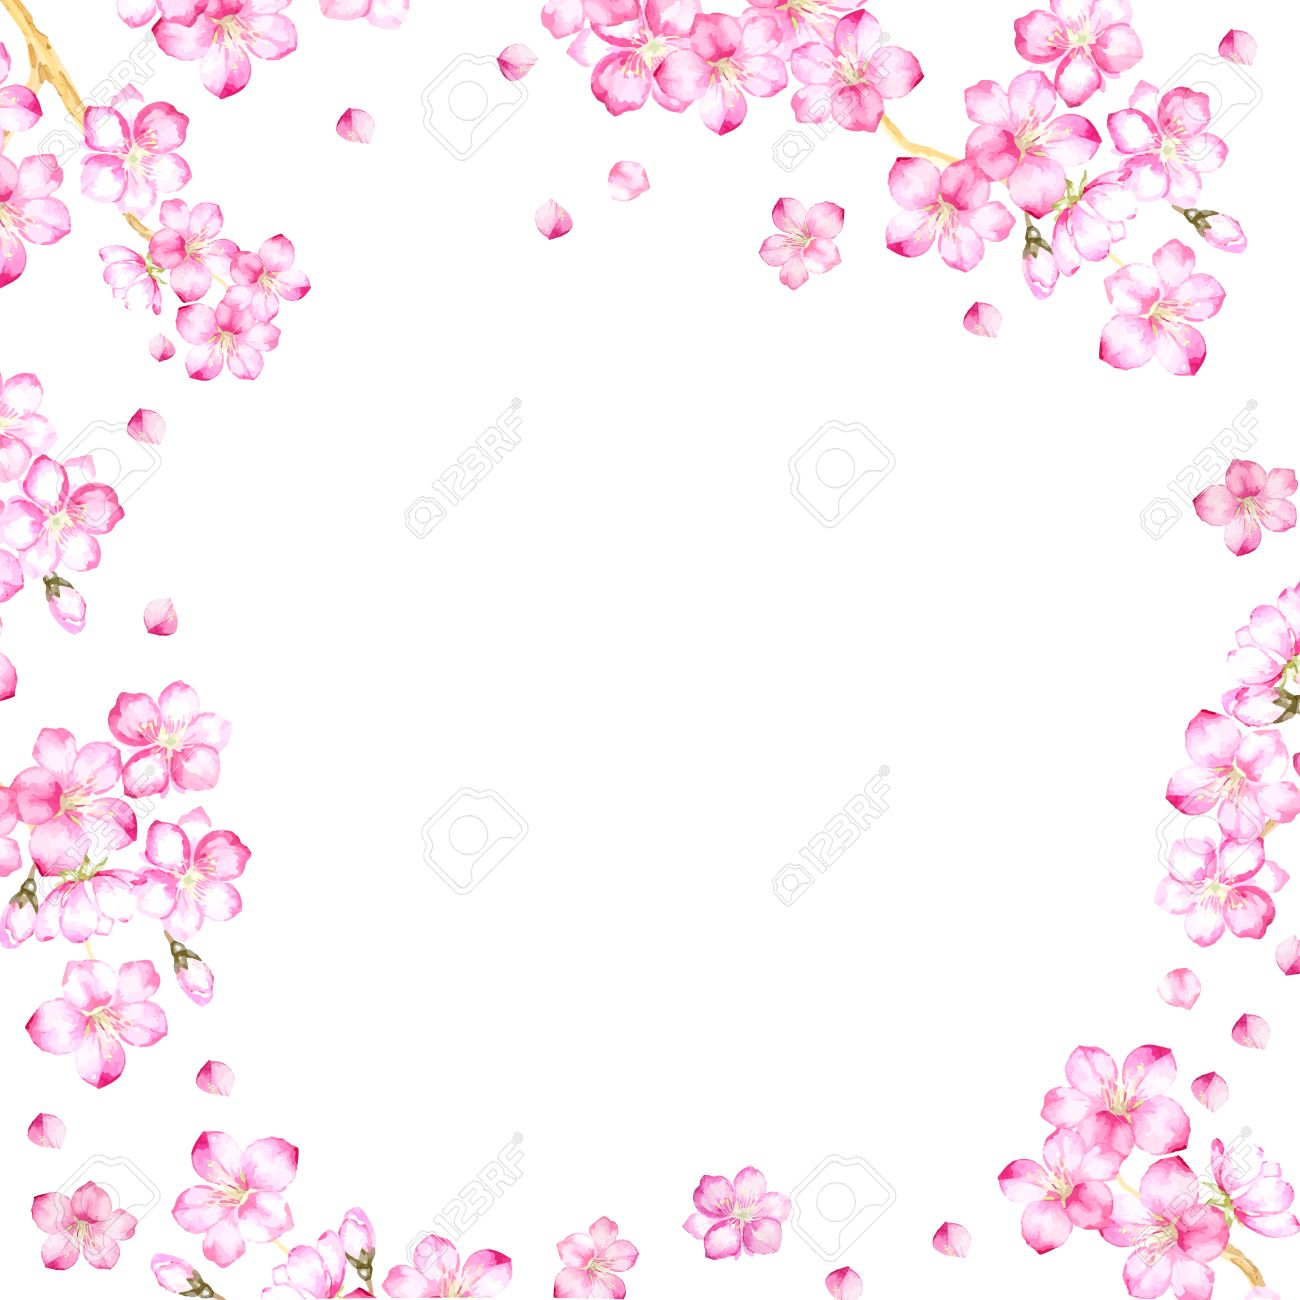 Spring Flowers Wallpaper Over White Background Royalty